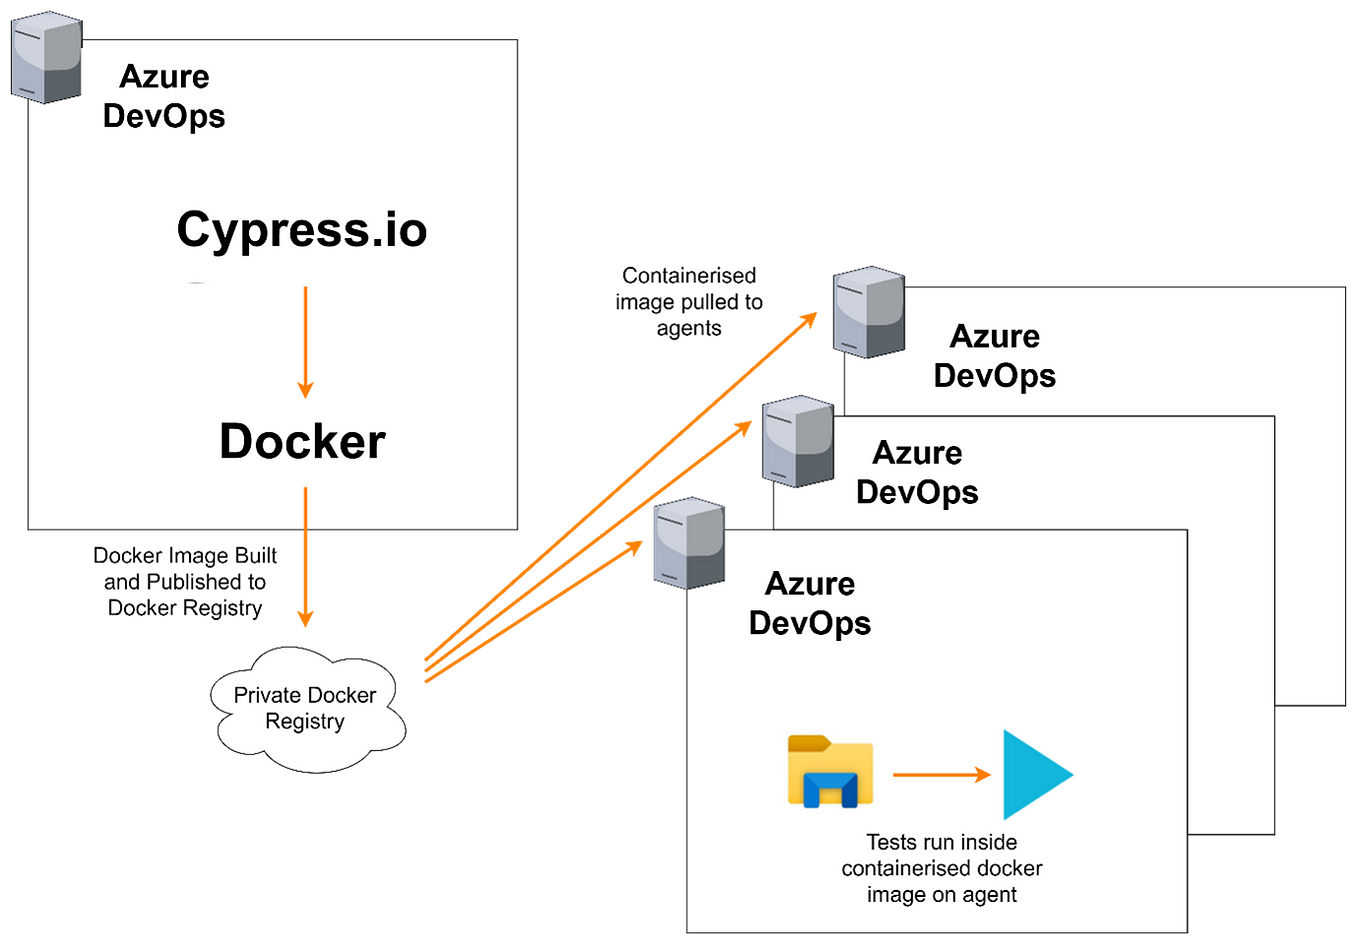 A diagram depicting the journey of creating Containerised Docker Images for Agents as described in the text